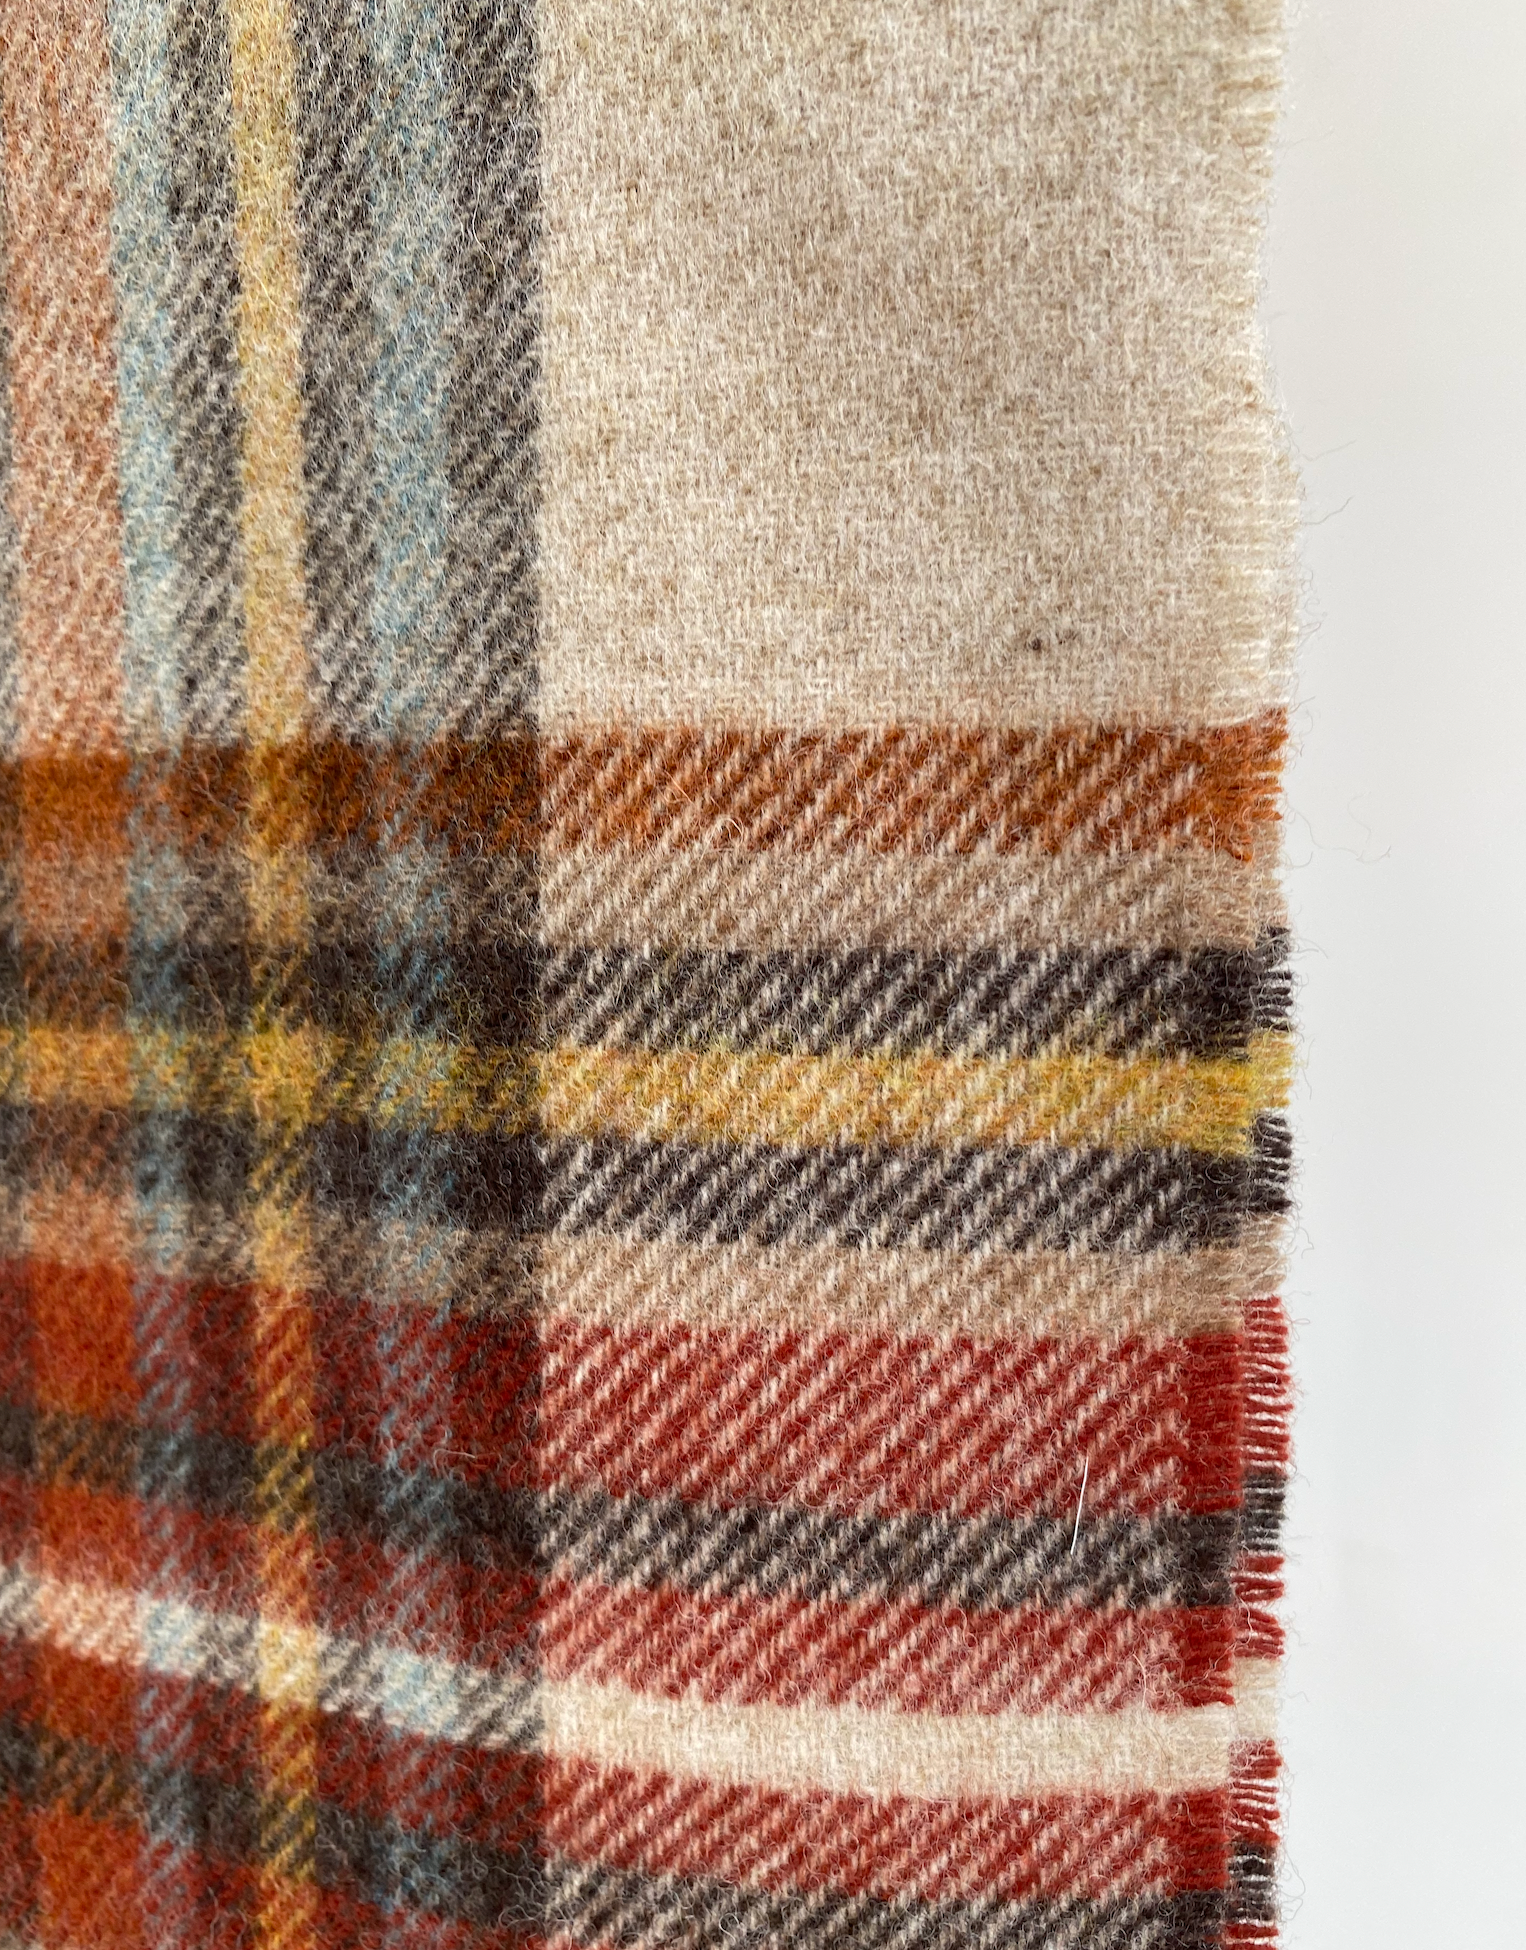 Merino Wool Scarf - Biscuit marl with Rust Orange Check